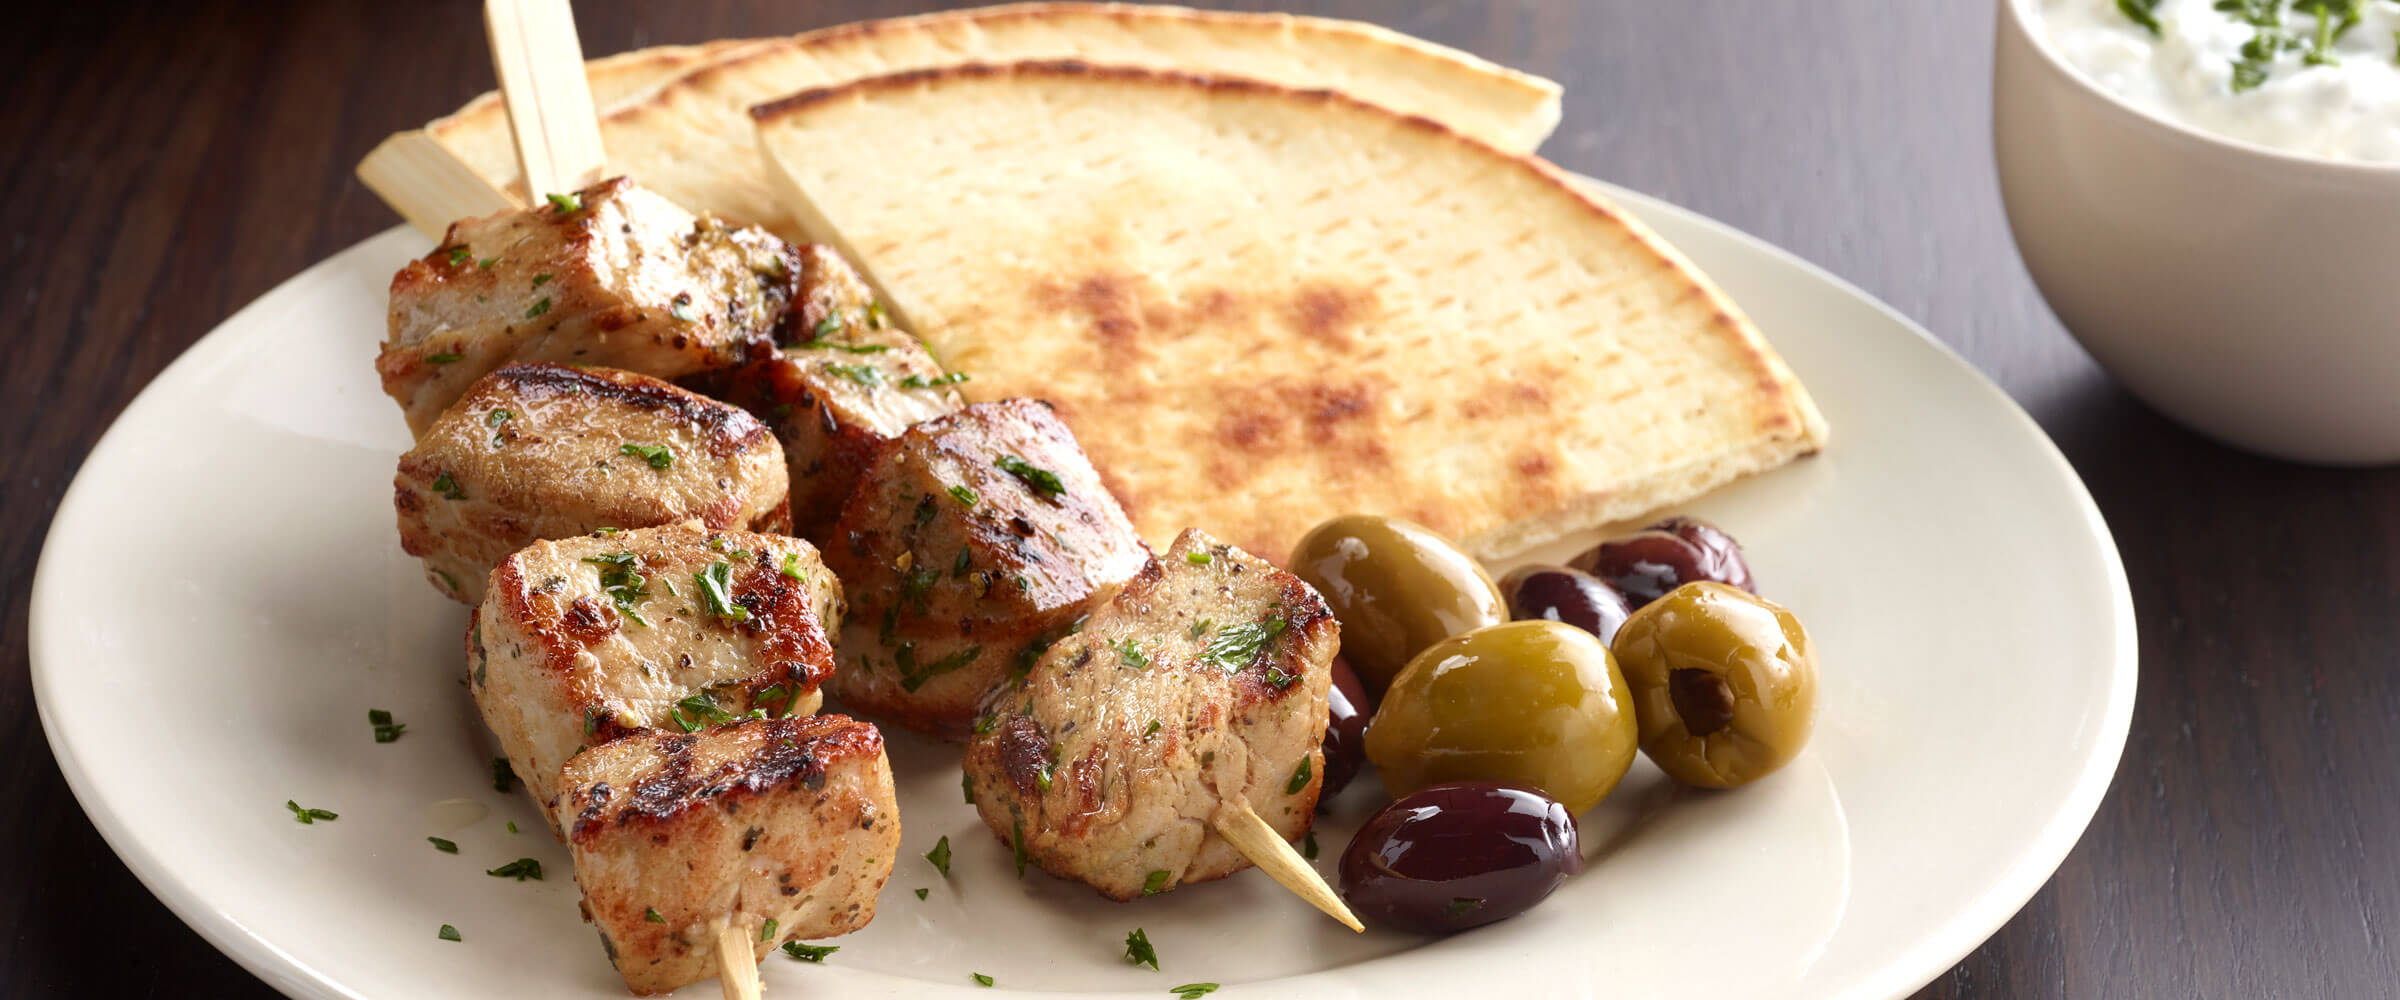 Greek Pork Kabobs with side of pita bread slices and olives on white plate